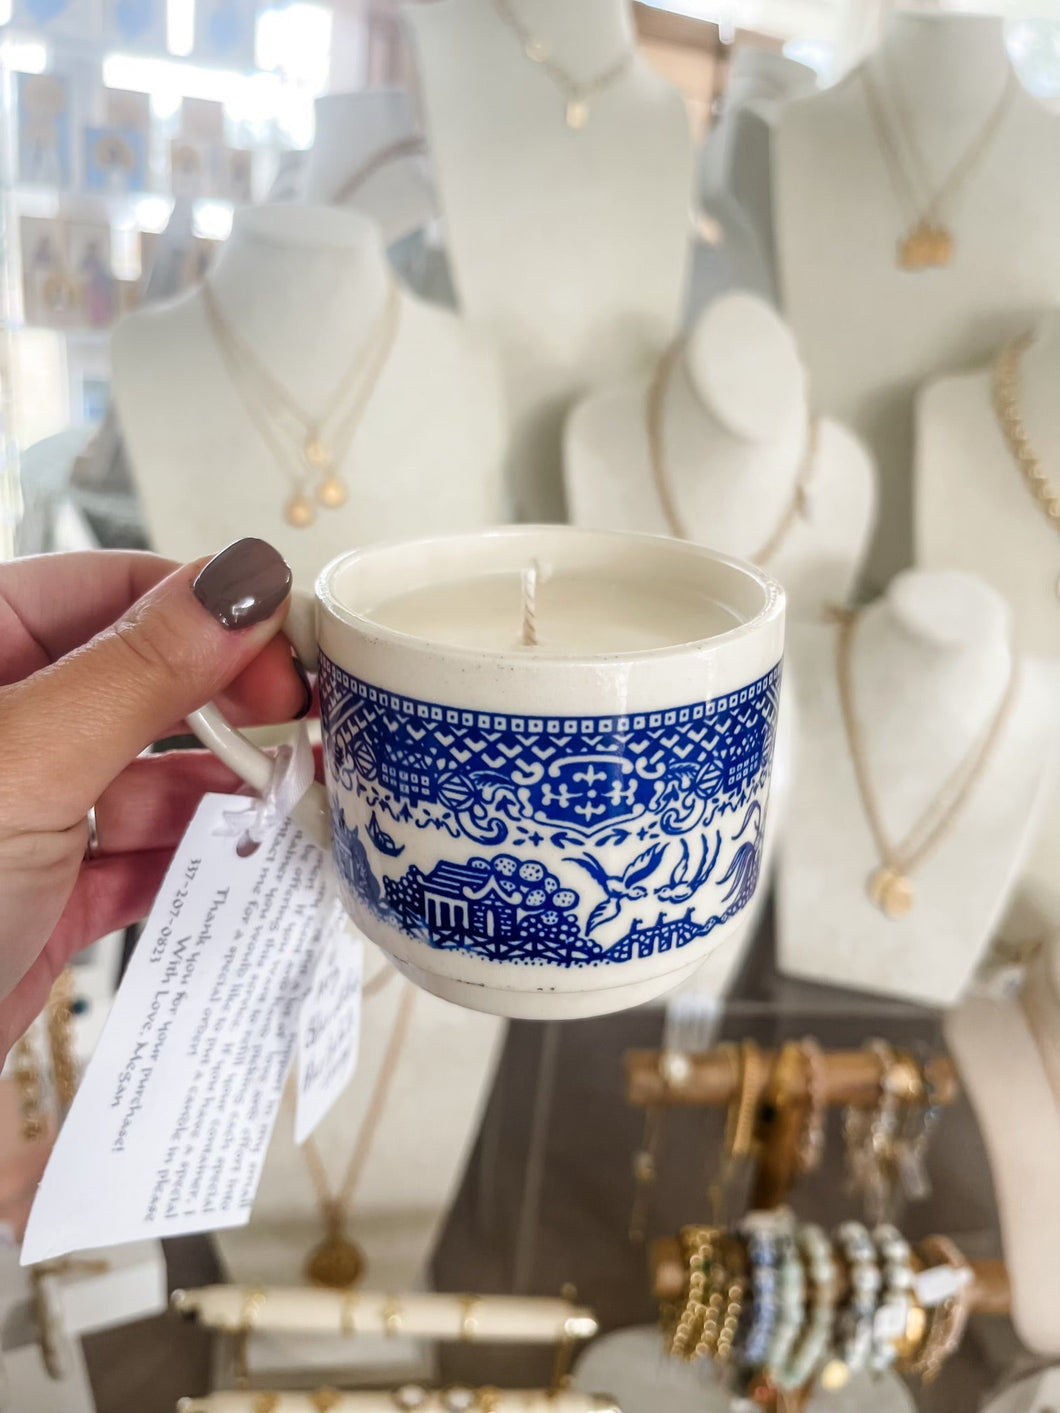 Blue Hydrangea Blue and White Tea Cup B scented candle-Belle Reve Designs by Megan Gatte